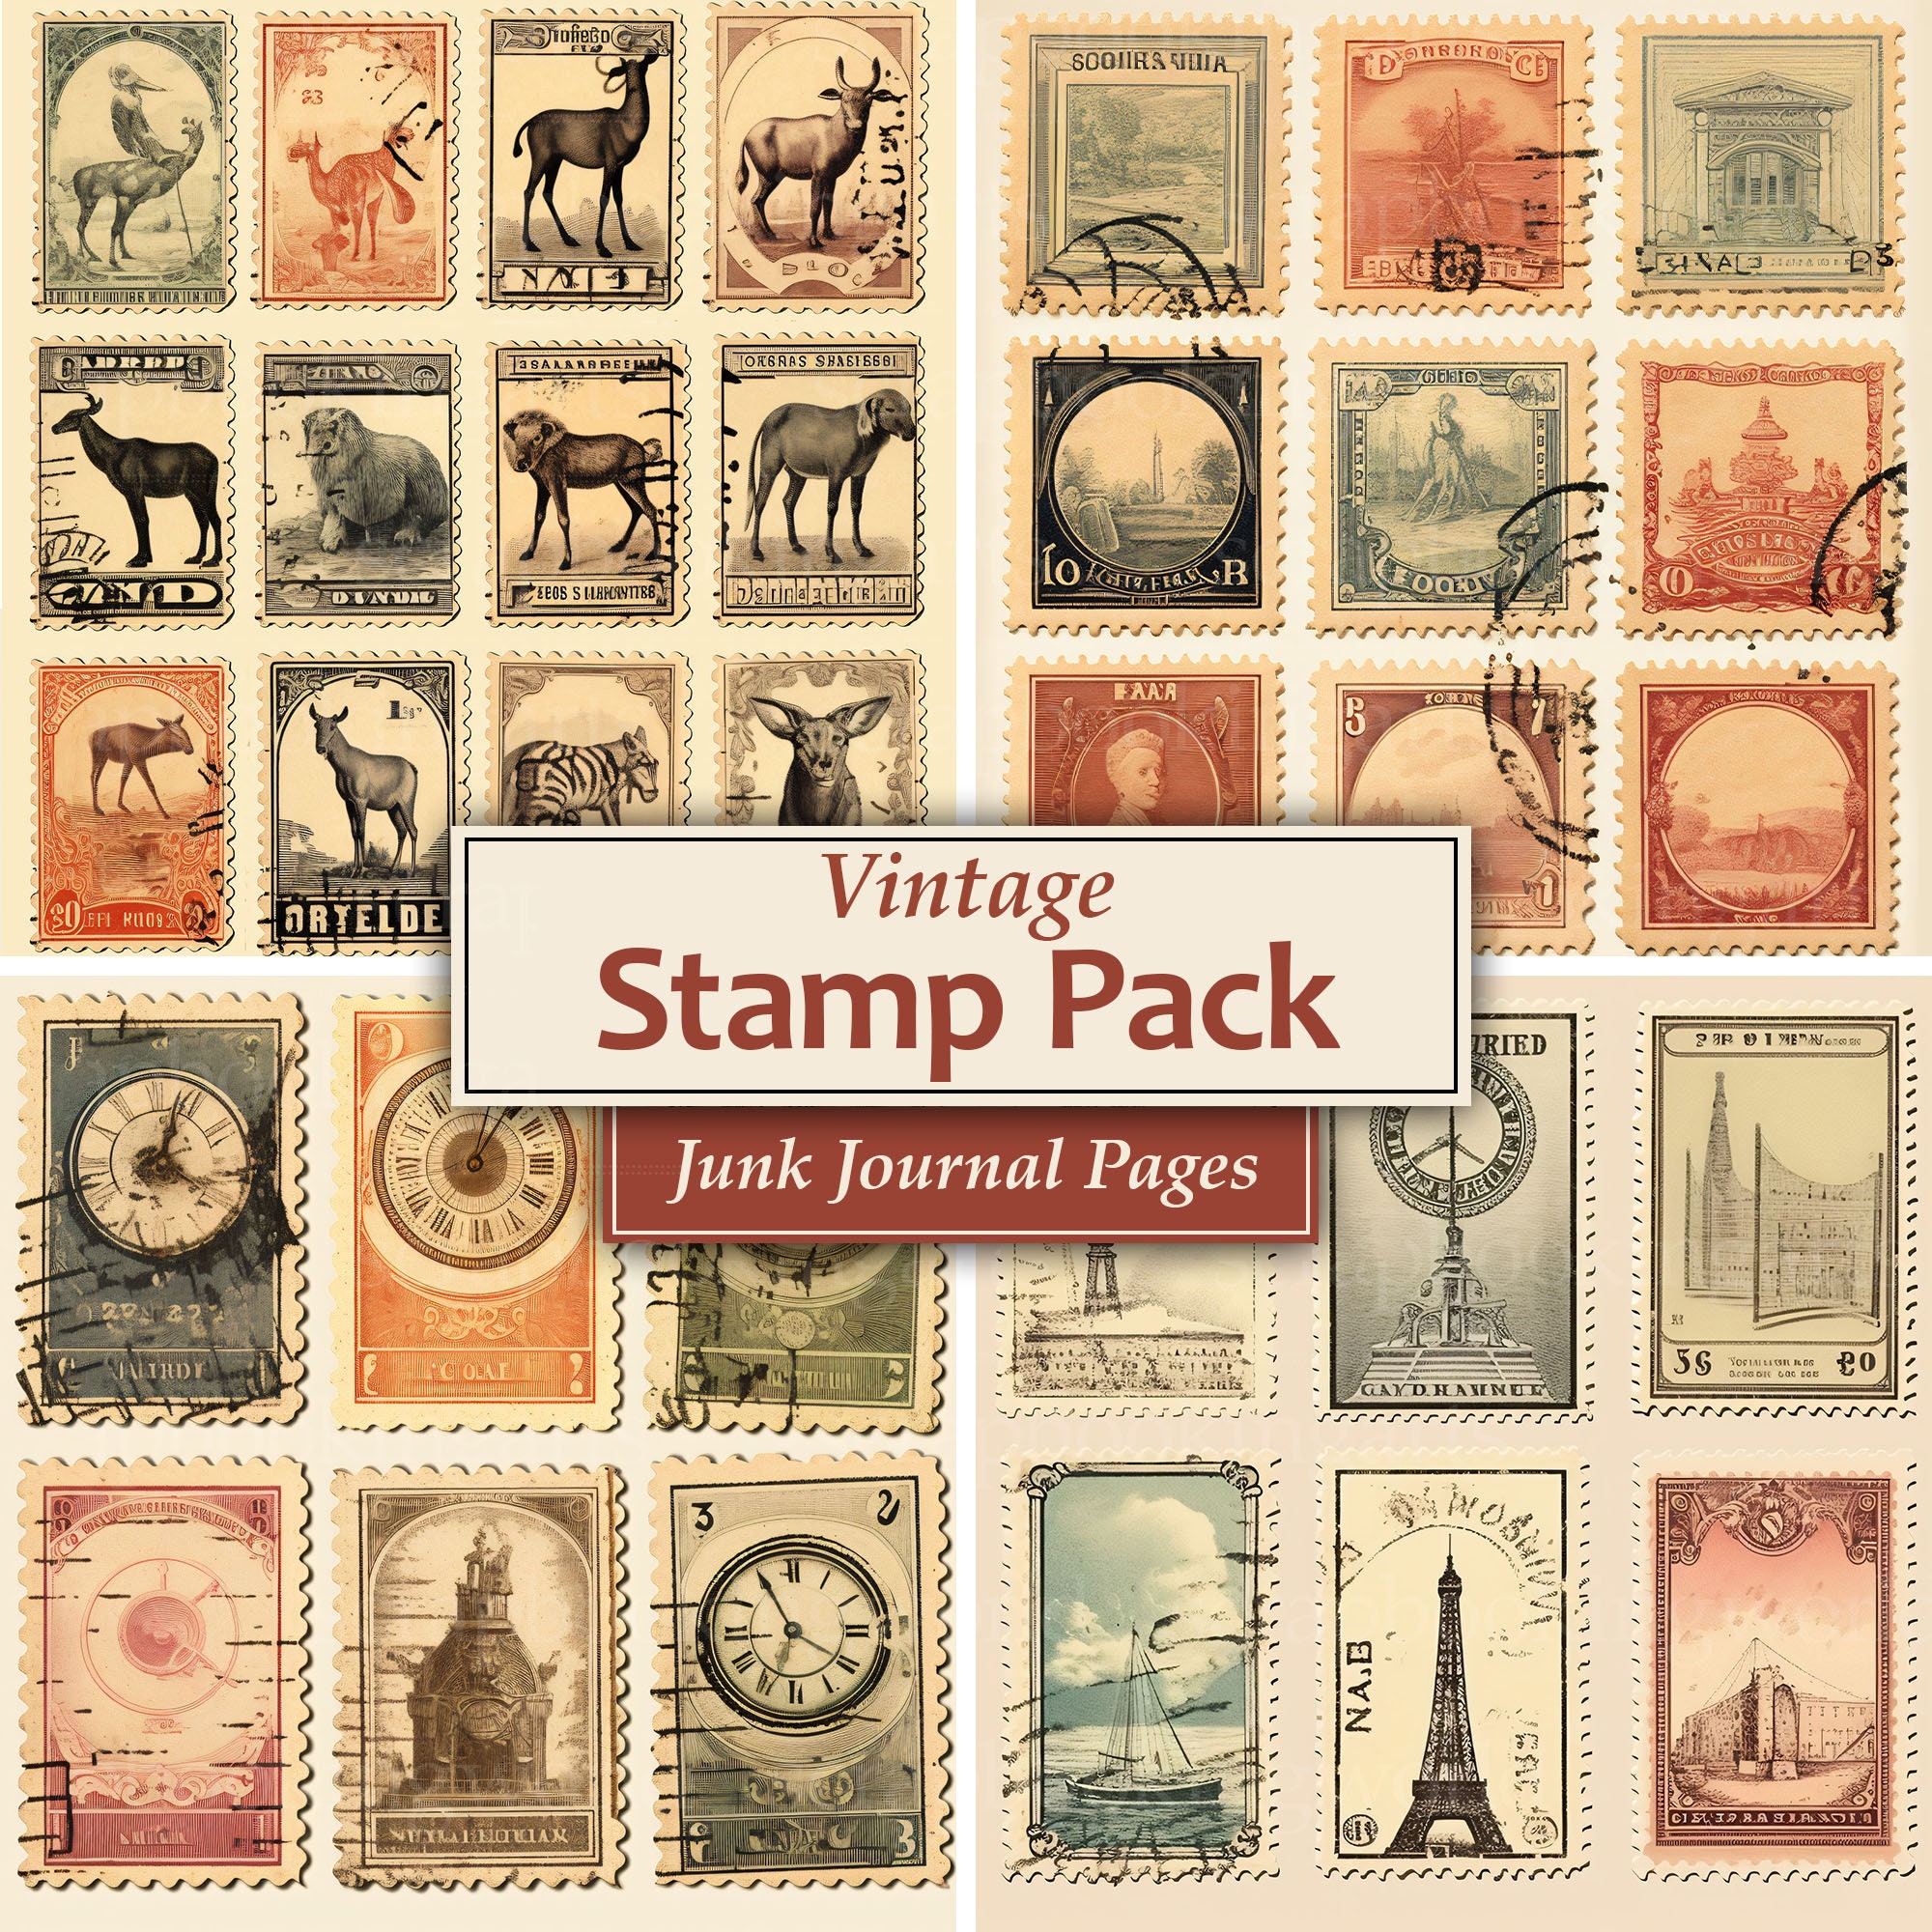 Retro postage stamps - for wedding invitation Vector Image